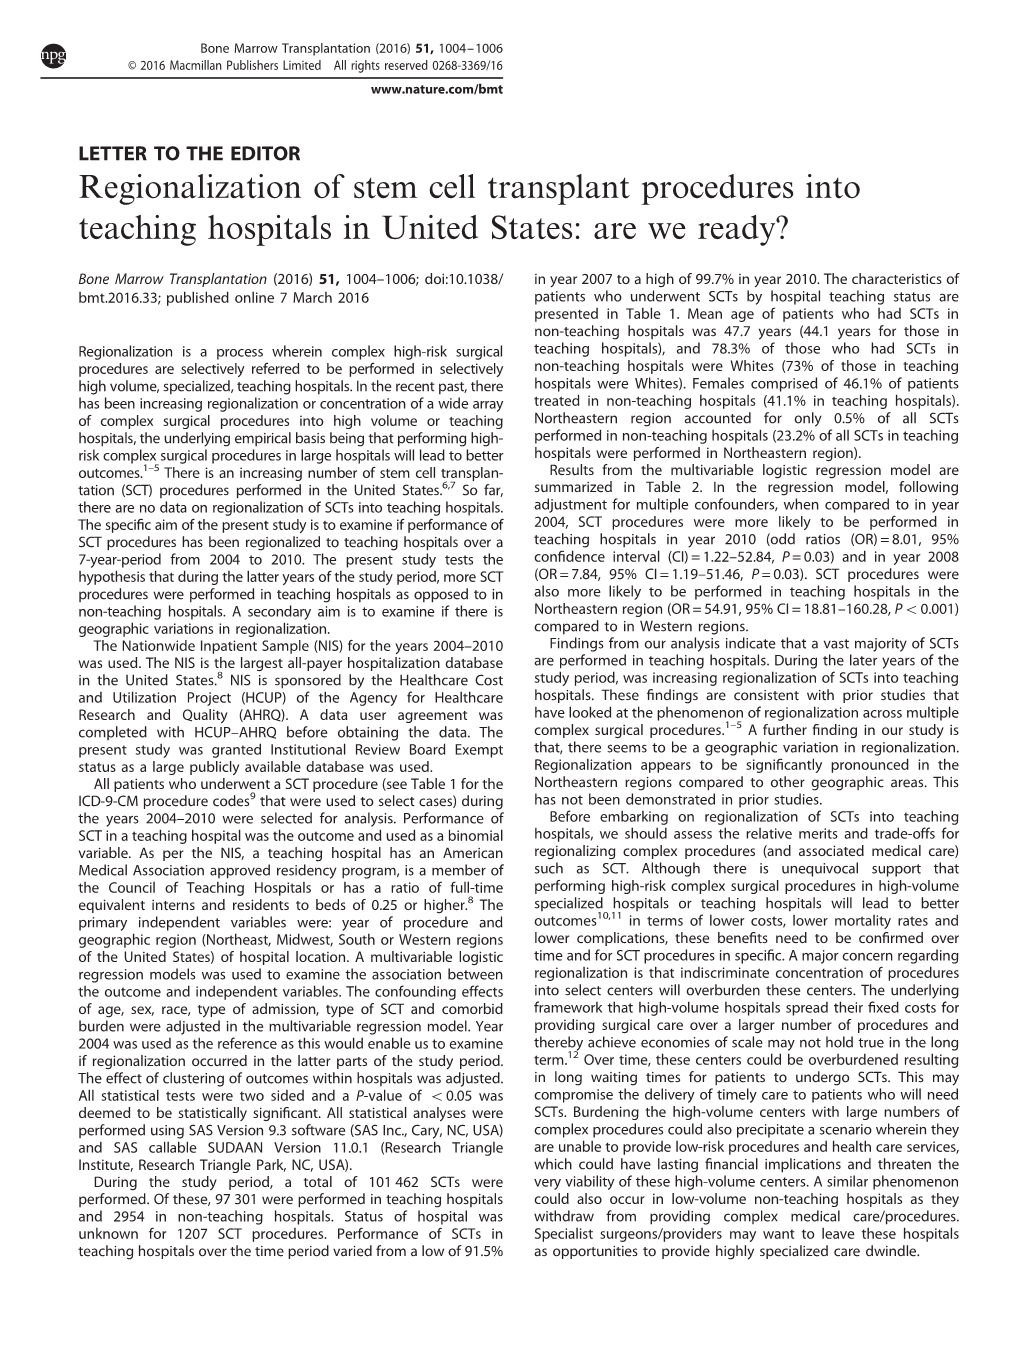 Regionalization of Stem Cell Transplant Procedures Into Teaching Hospitals in United States: Are We Ready?